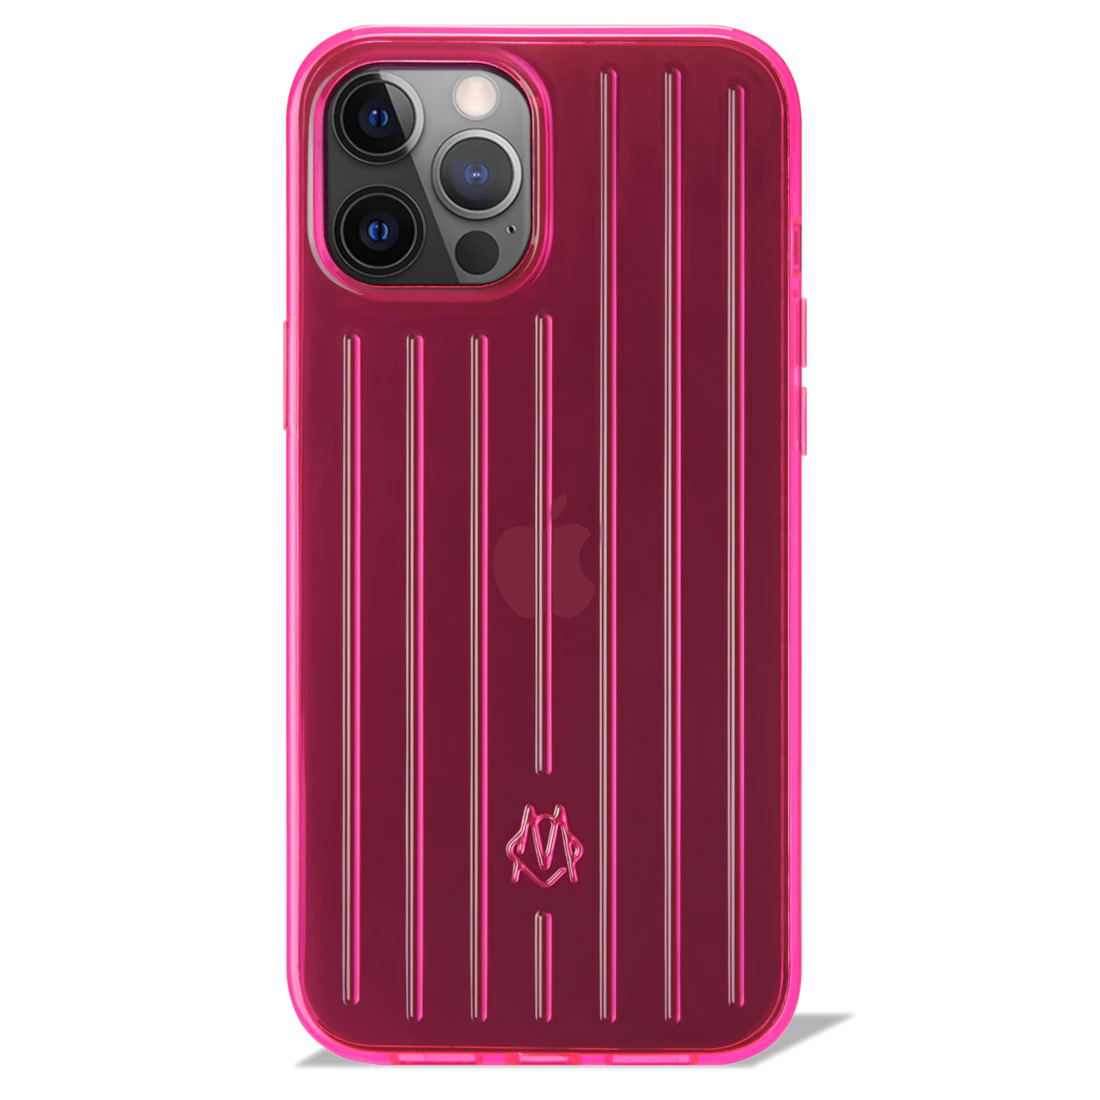 iPhone Accessories Neon Pink Case for iPhone 12 Pro Max - 1